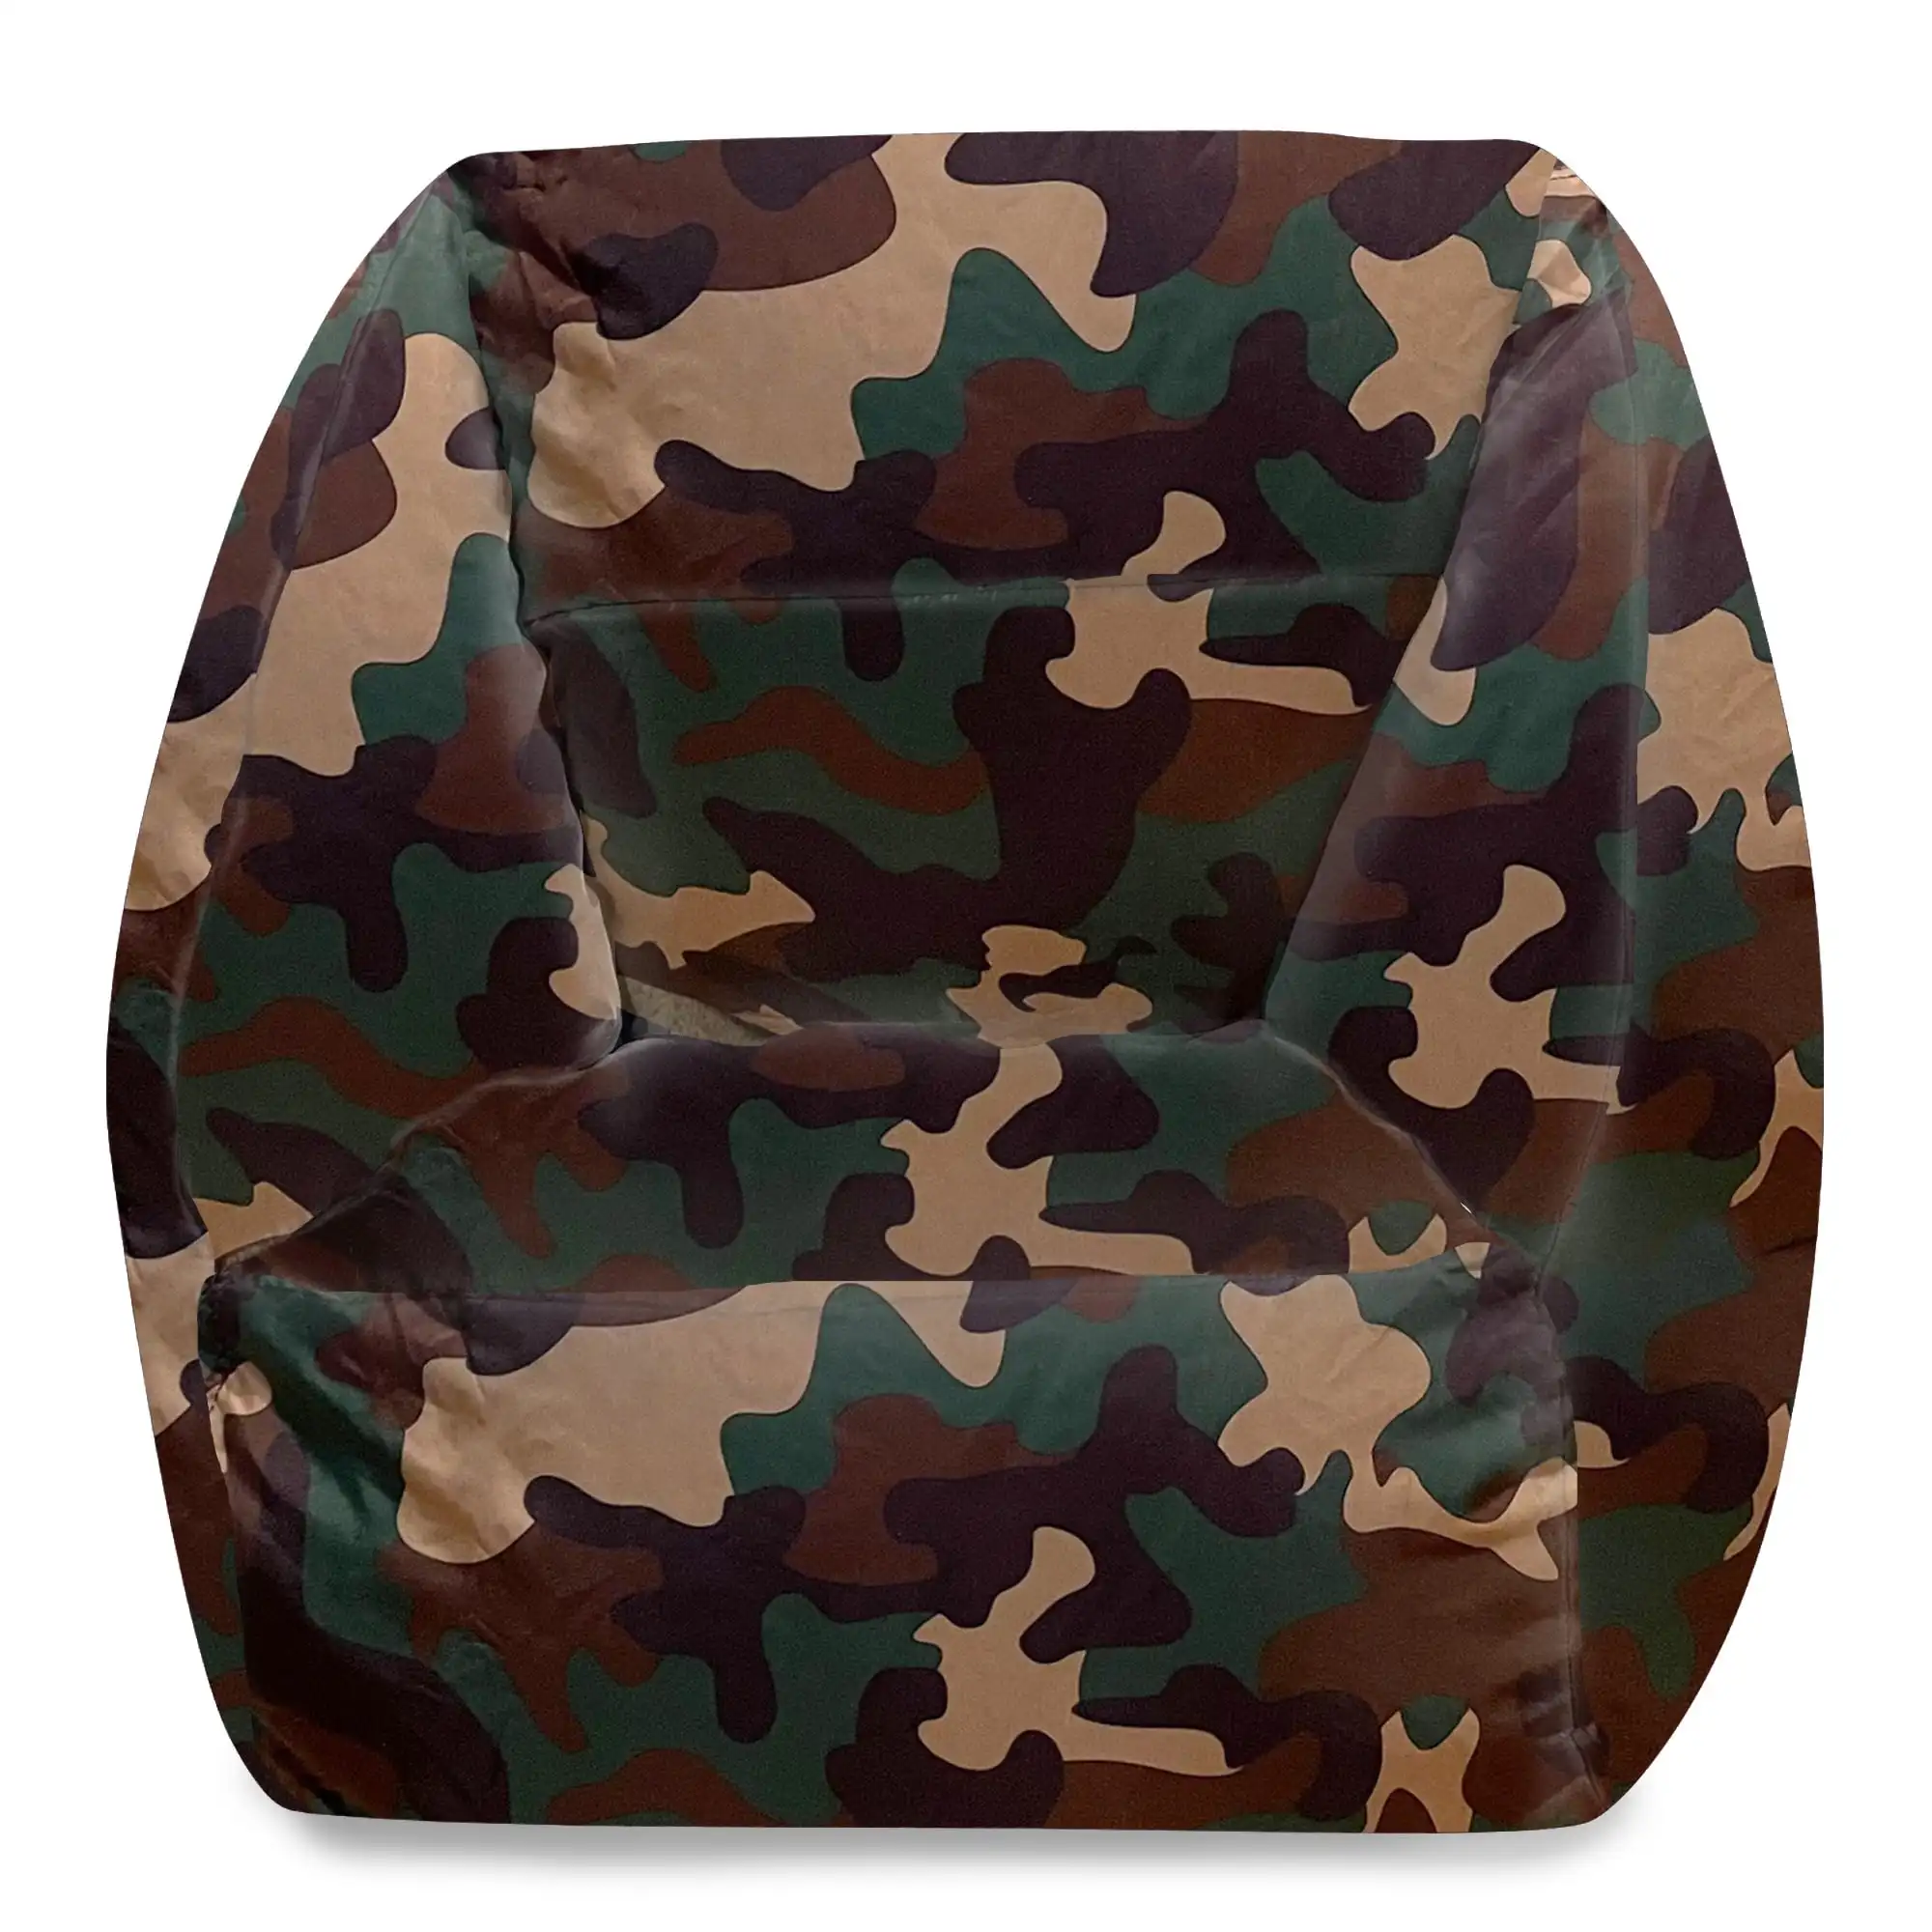 

Structured Comfy Bean Bag Chair, Nylon Lazy Floor Sofa for Living Room Bedroom Fluffy Couch with Filling - Camo Green